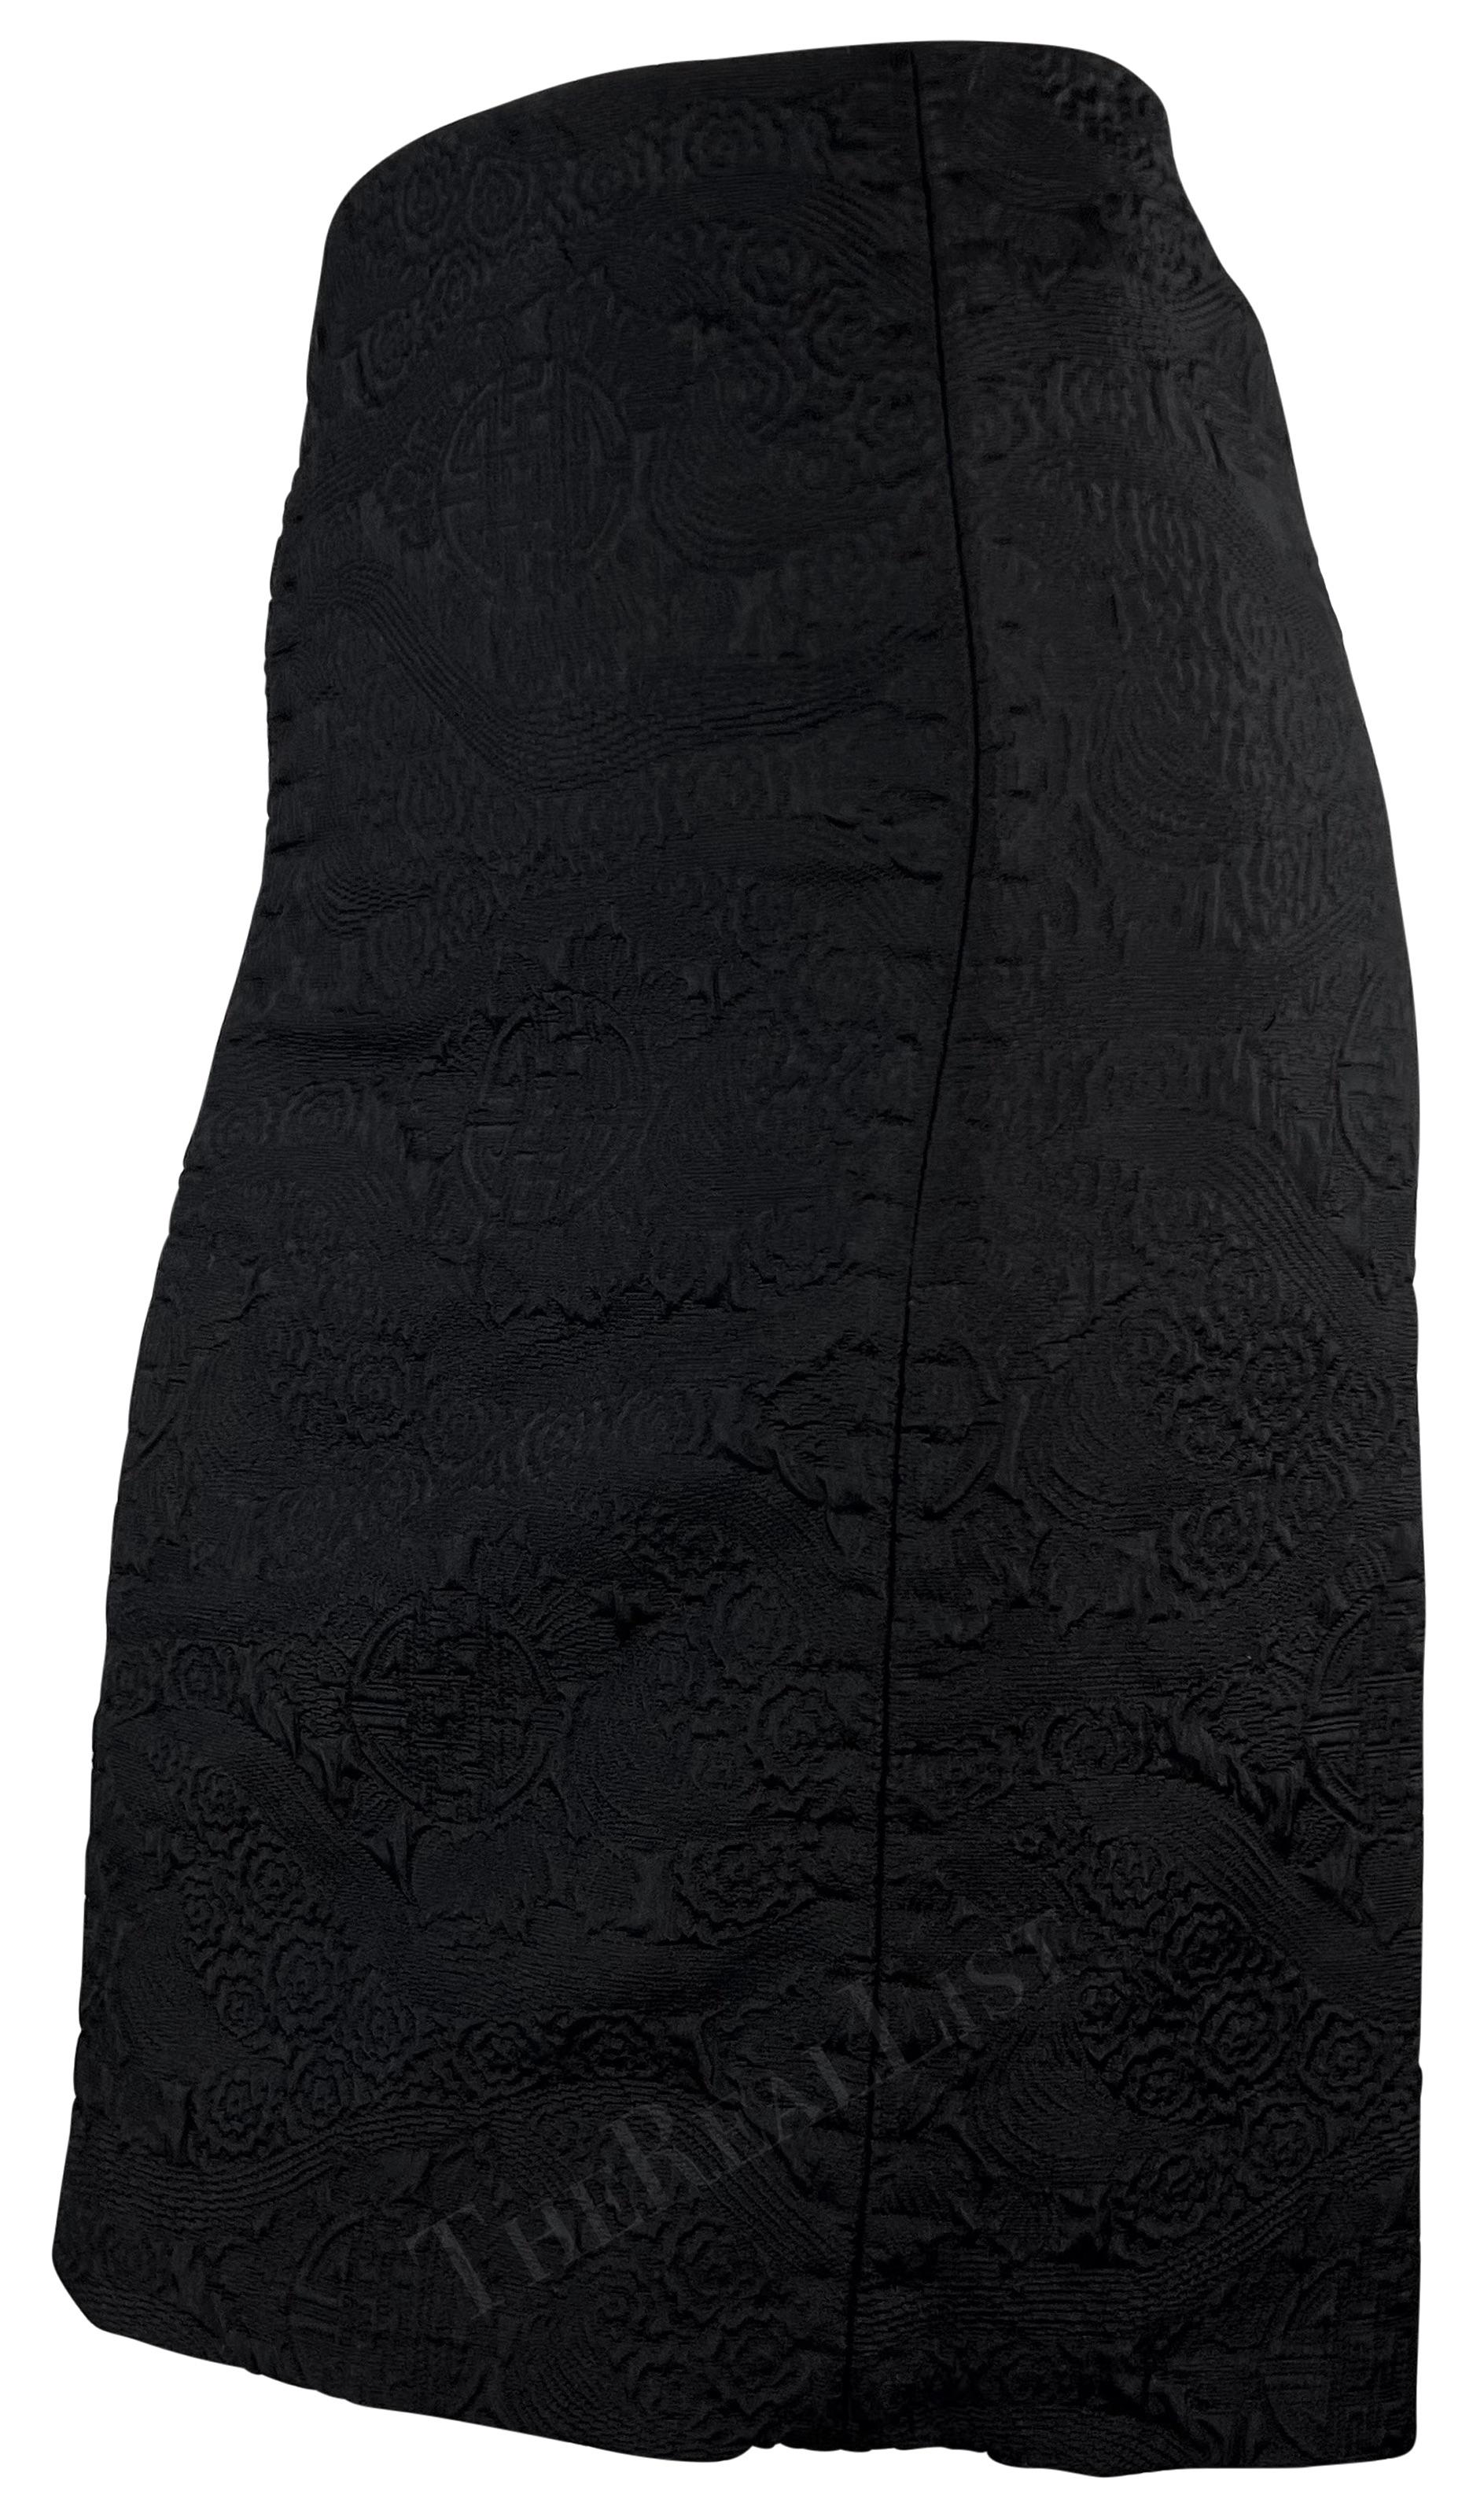 F/W 2004 Yves Saint Laurent by Tom Ford Chinoiserie Brocade Black Skirt In Excellent Condition For Sale In West Hollywood, CA